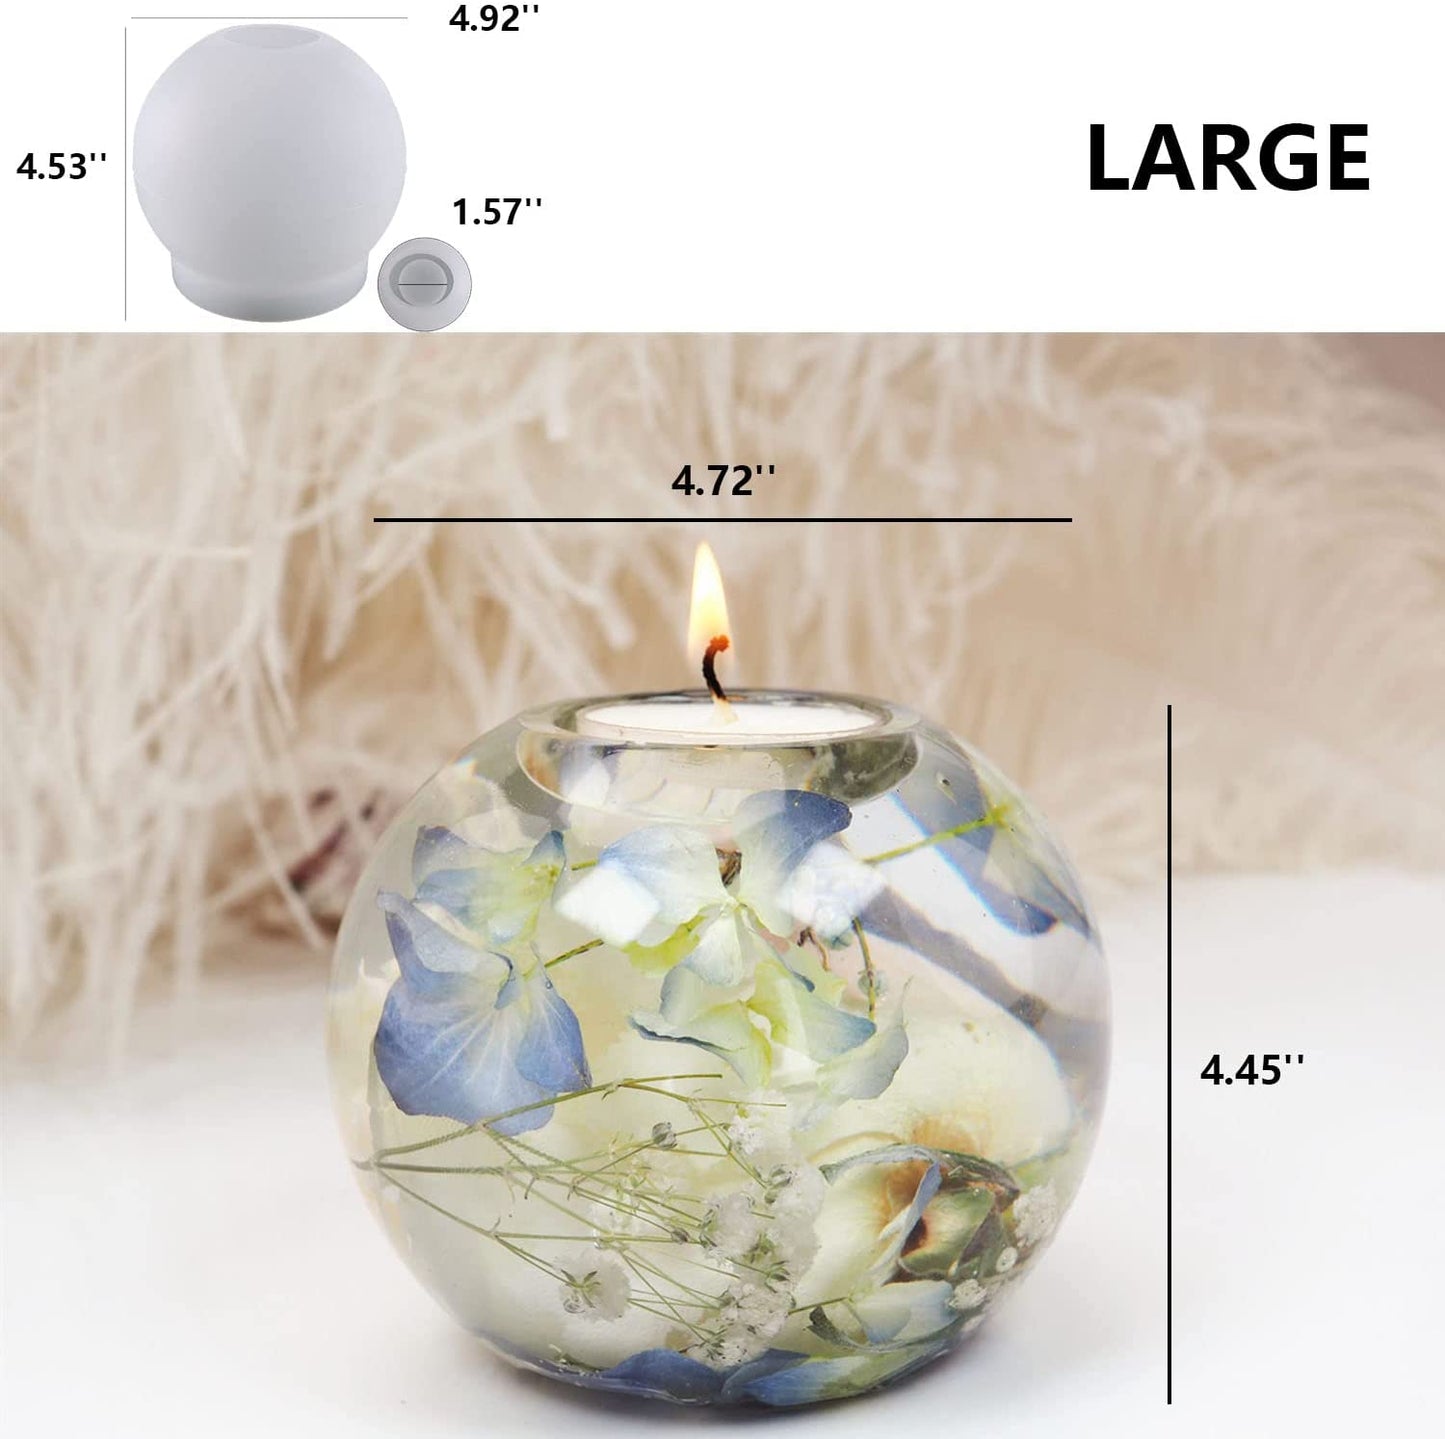 The Sphere Candle Holders